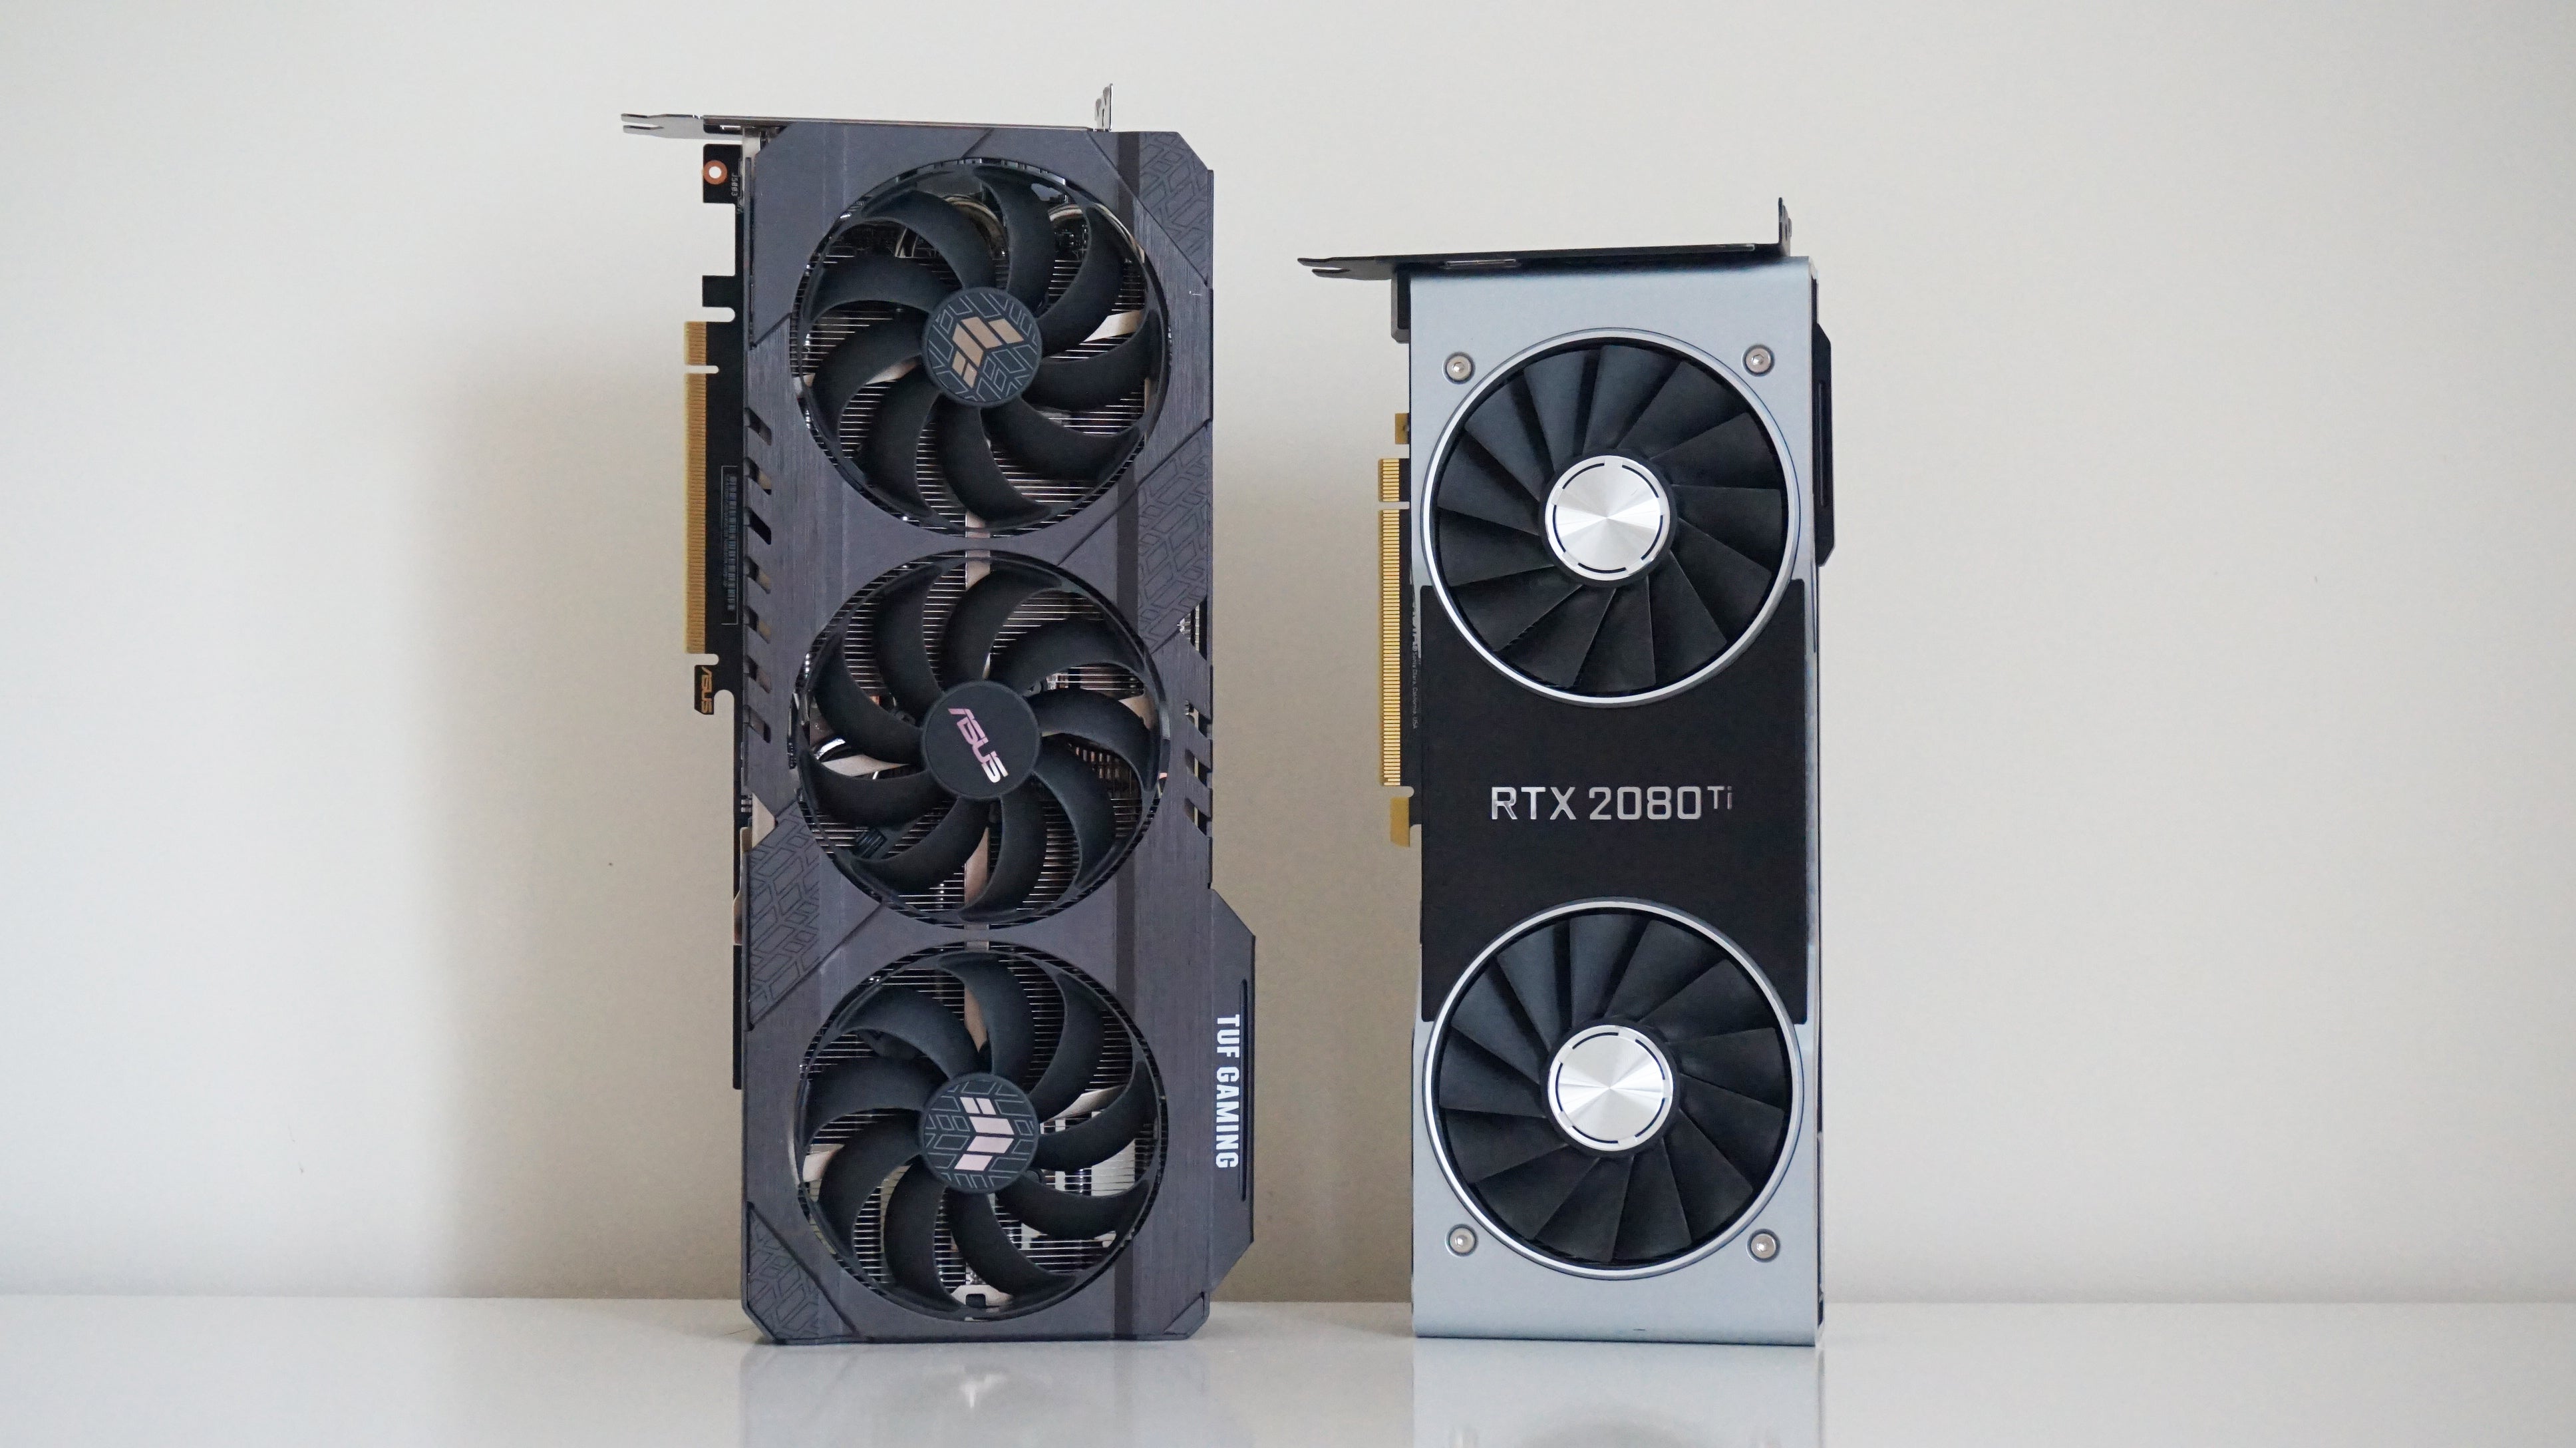 Nvidia RTX 3080 Ti: which 4K graphics card is better? Paper Shotgun